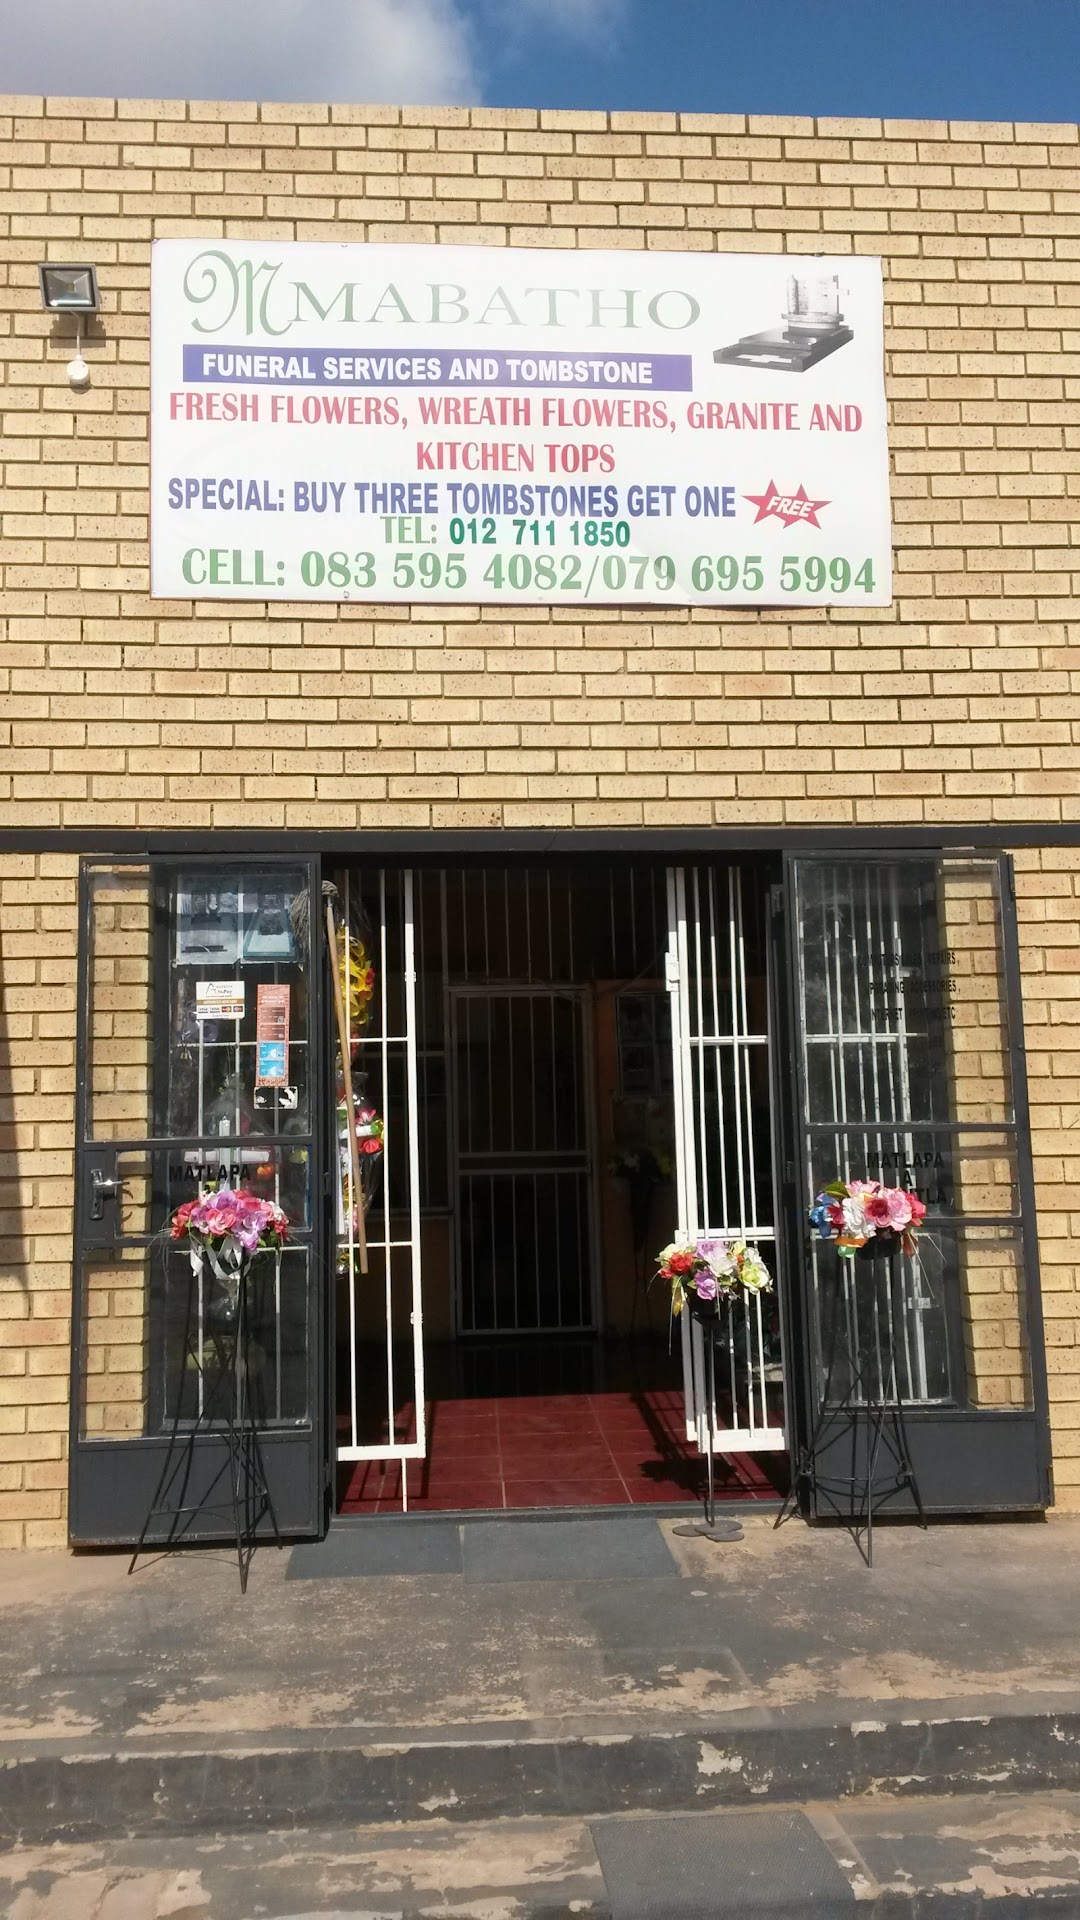 Mmabatho Funeral Services & Tombstone